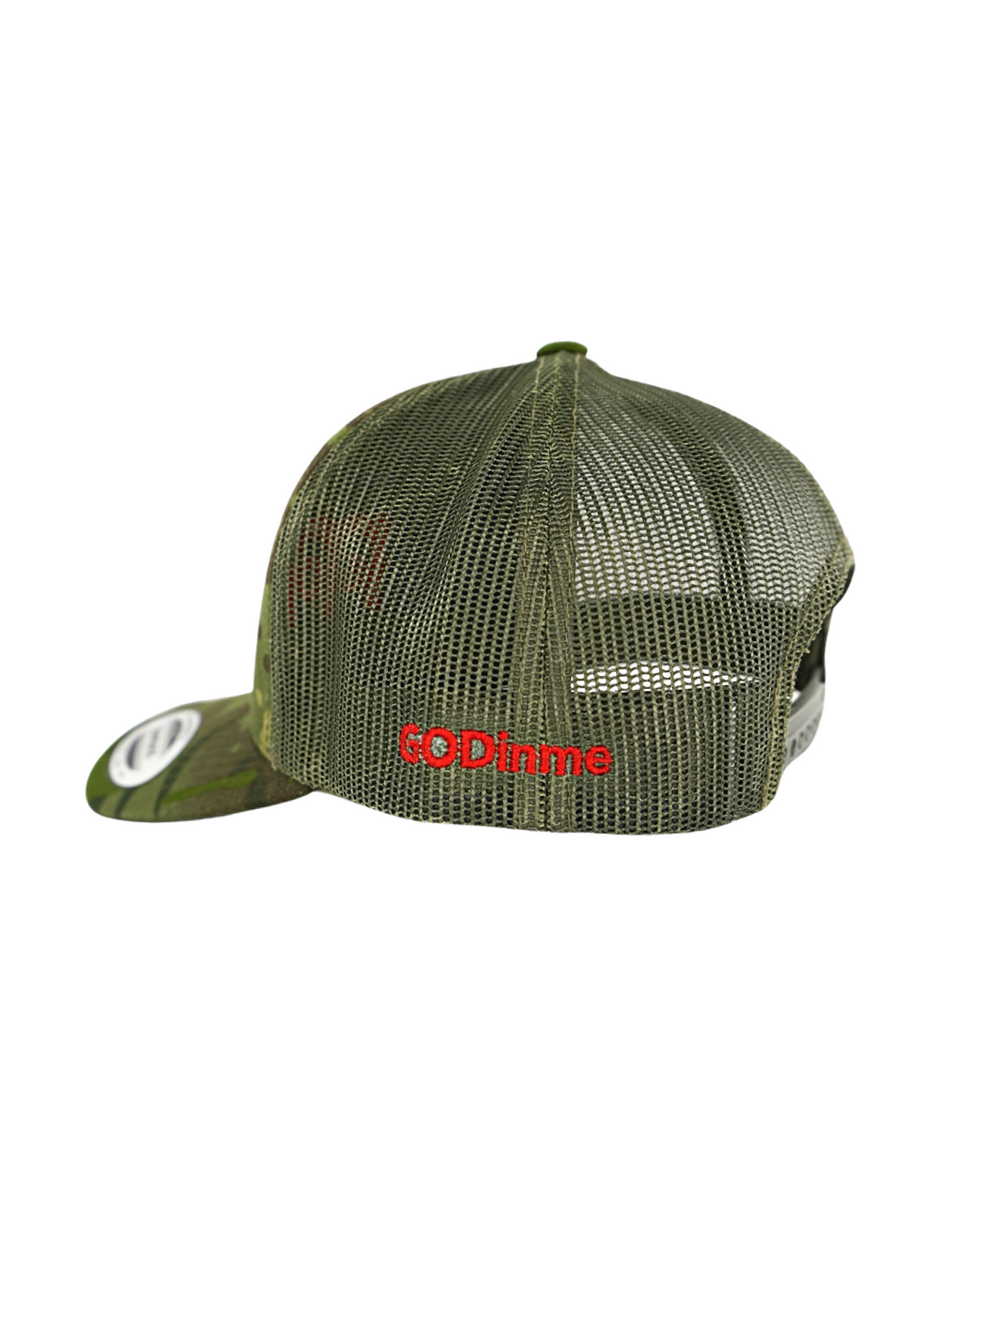 Green camouflage design, premium mesh backing, curved visor, Red puff logo on front, Red GODinme on left side, and matching snapback closure. 